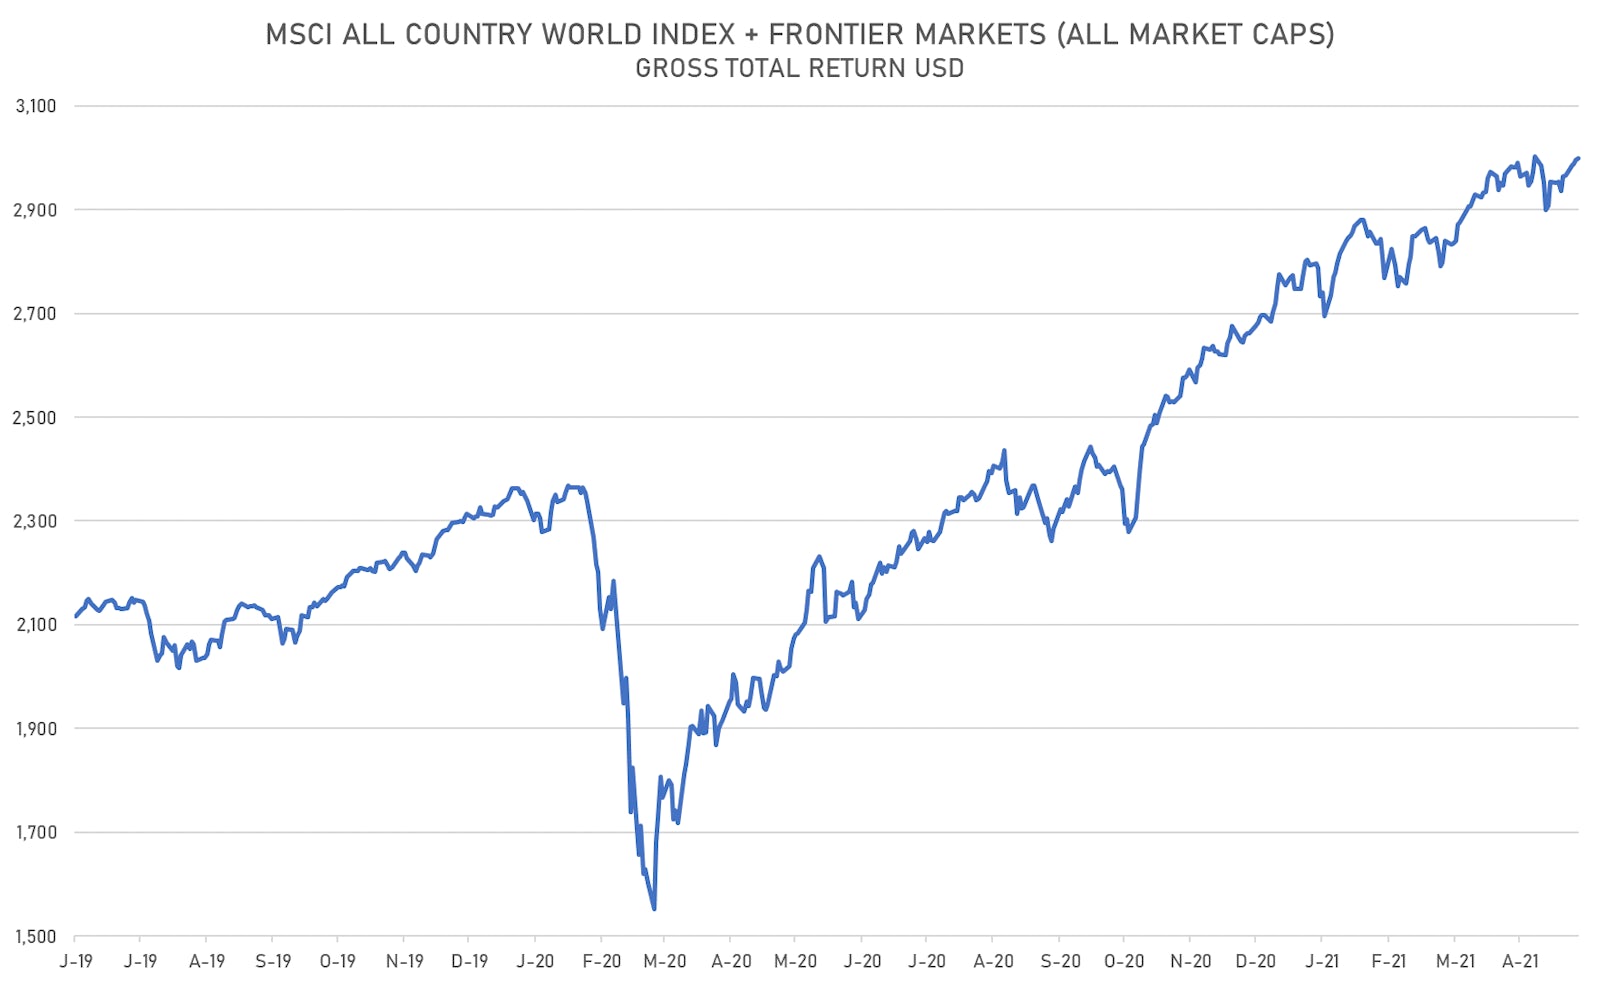 MSCI ALL COUNTRY WORLD INDEX + FM | Sources: ϕpost, Refinitiv data